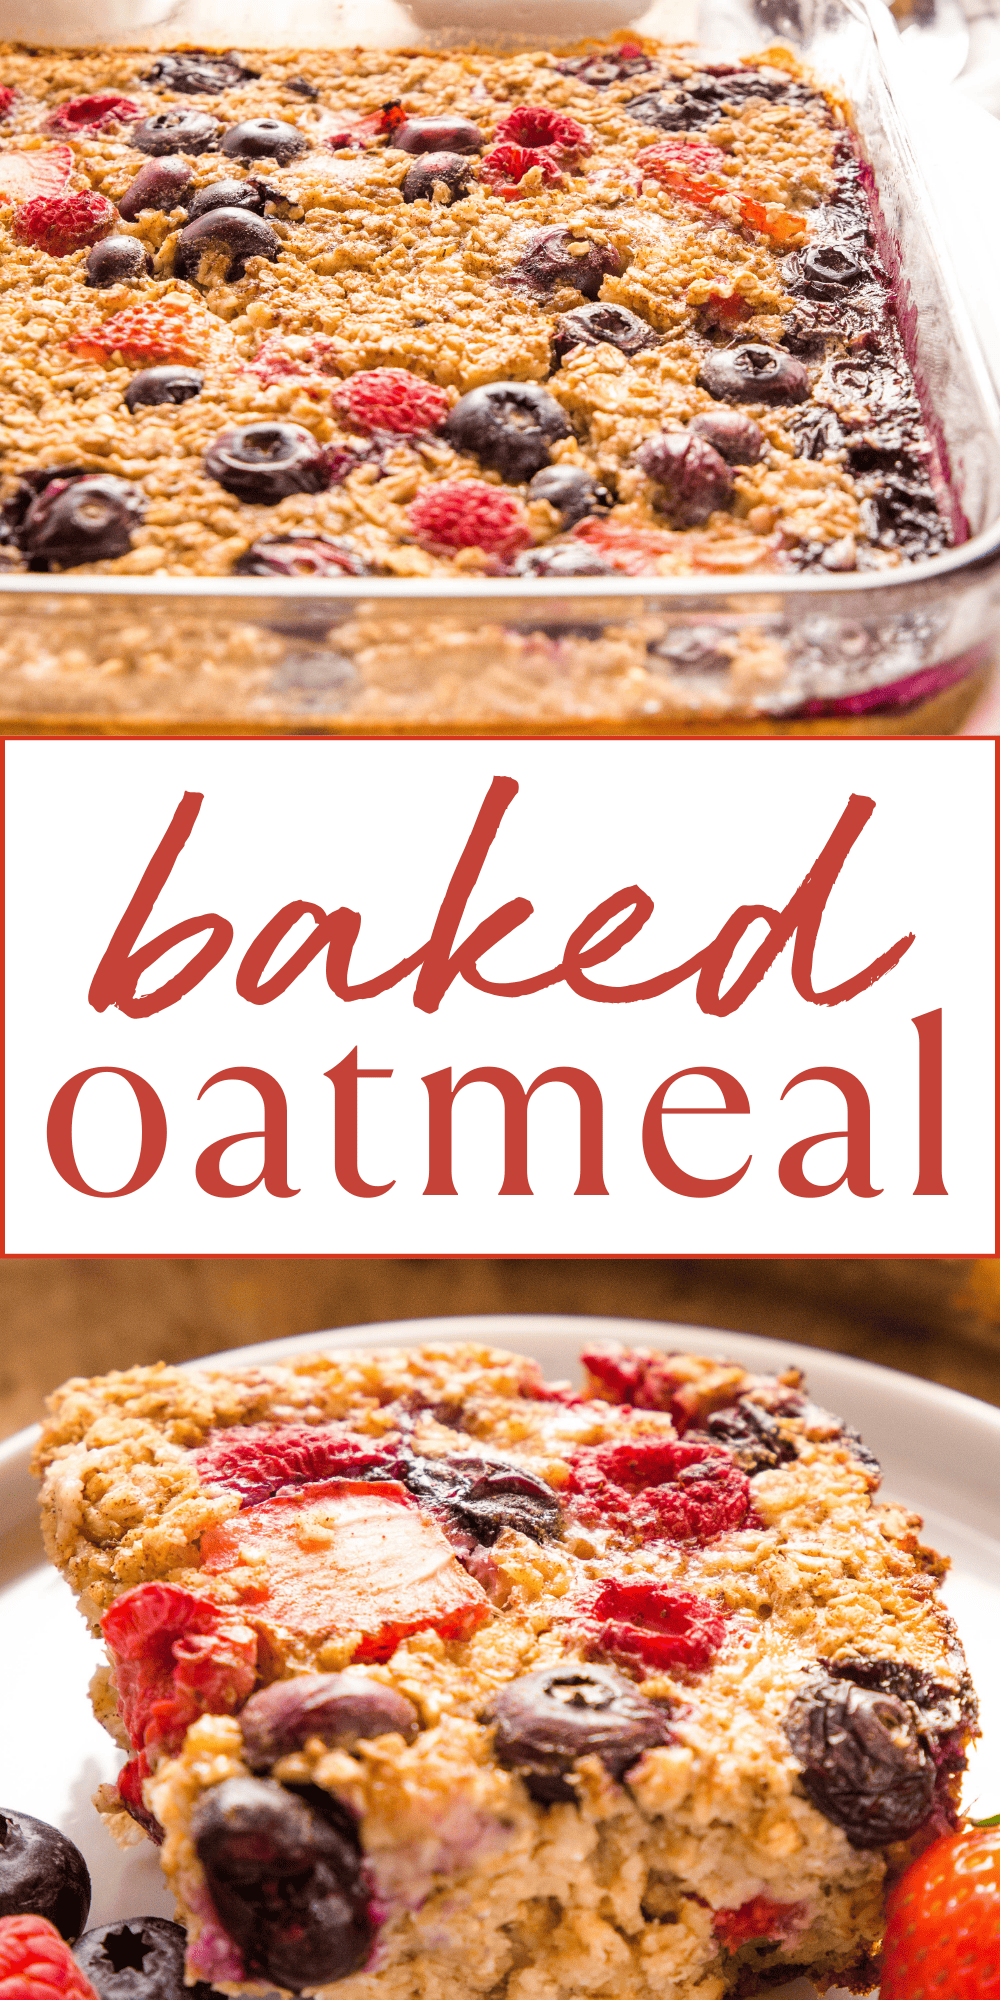 This Baked Oatmeal recipe is an easy healthy make-ahead breakfast that's perfect for busy mornings! It's made with oats, eggs for protein, milk (or dairy-free milk), and it's sweetened with fruit (no added sugar!). It's kid-friendly and perfect for serving with nut butter, maple syrup or your favourite toppings! Recipe from thebusybaker.ca! #bakedoatmeal #bakedoats #oatmealbake #breakfast #healthybreakfast #easybreakfast #simplebreakfast #health #kidfriendly #kidsbreakfast #bakedoatmealrecipe via @busybakerblog